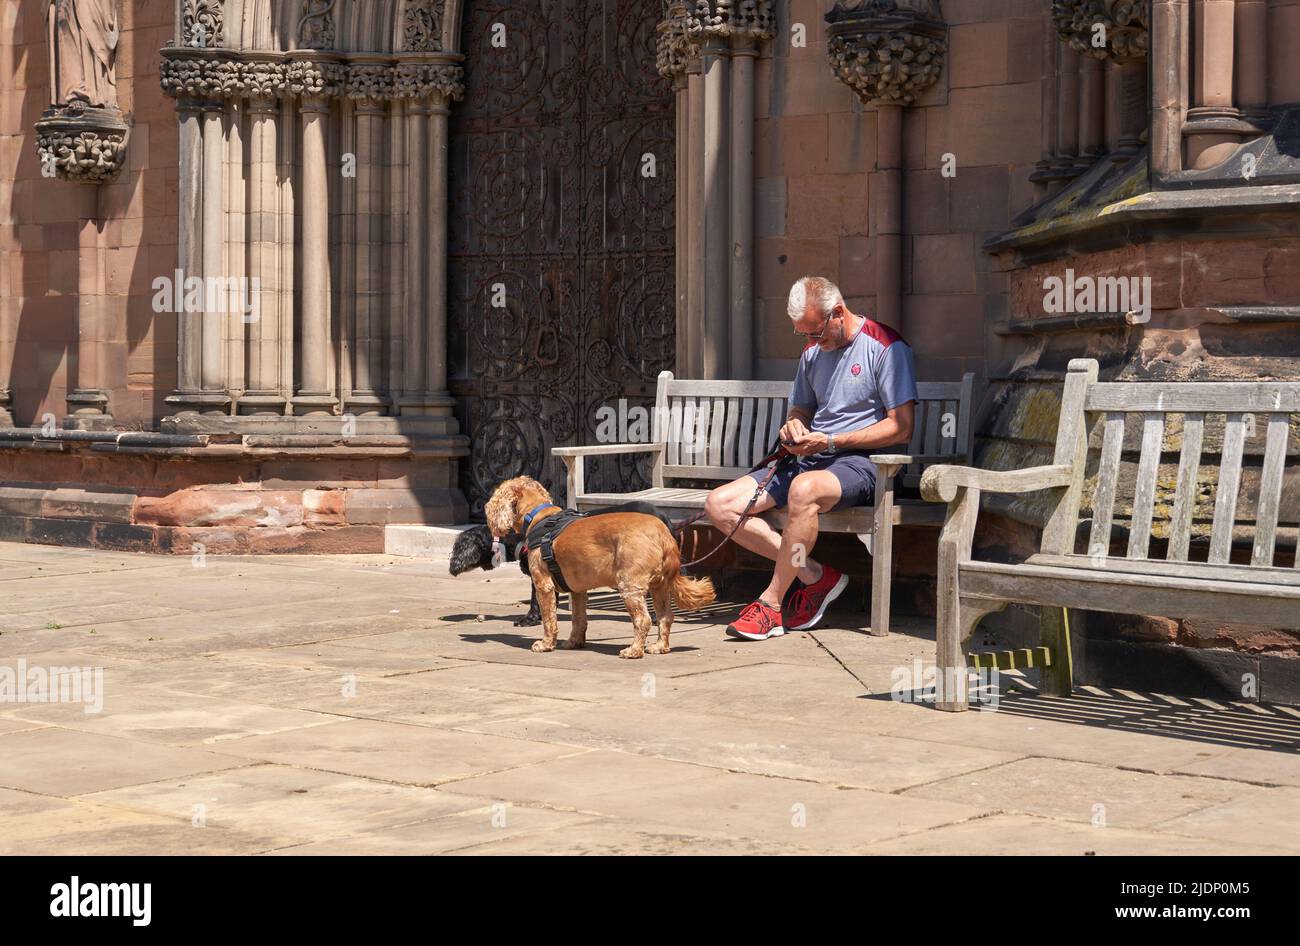 Man with dogs sitting on a bench Stock Photo